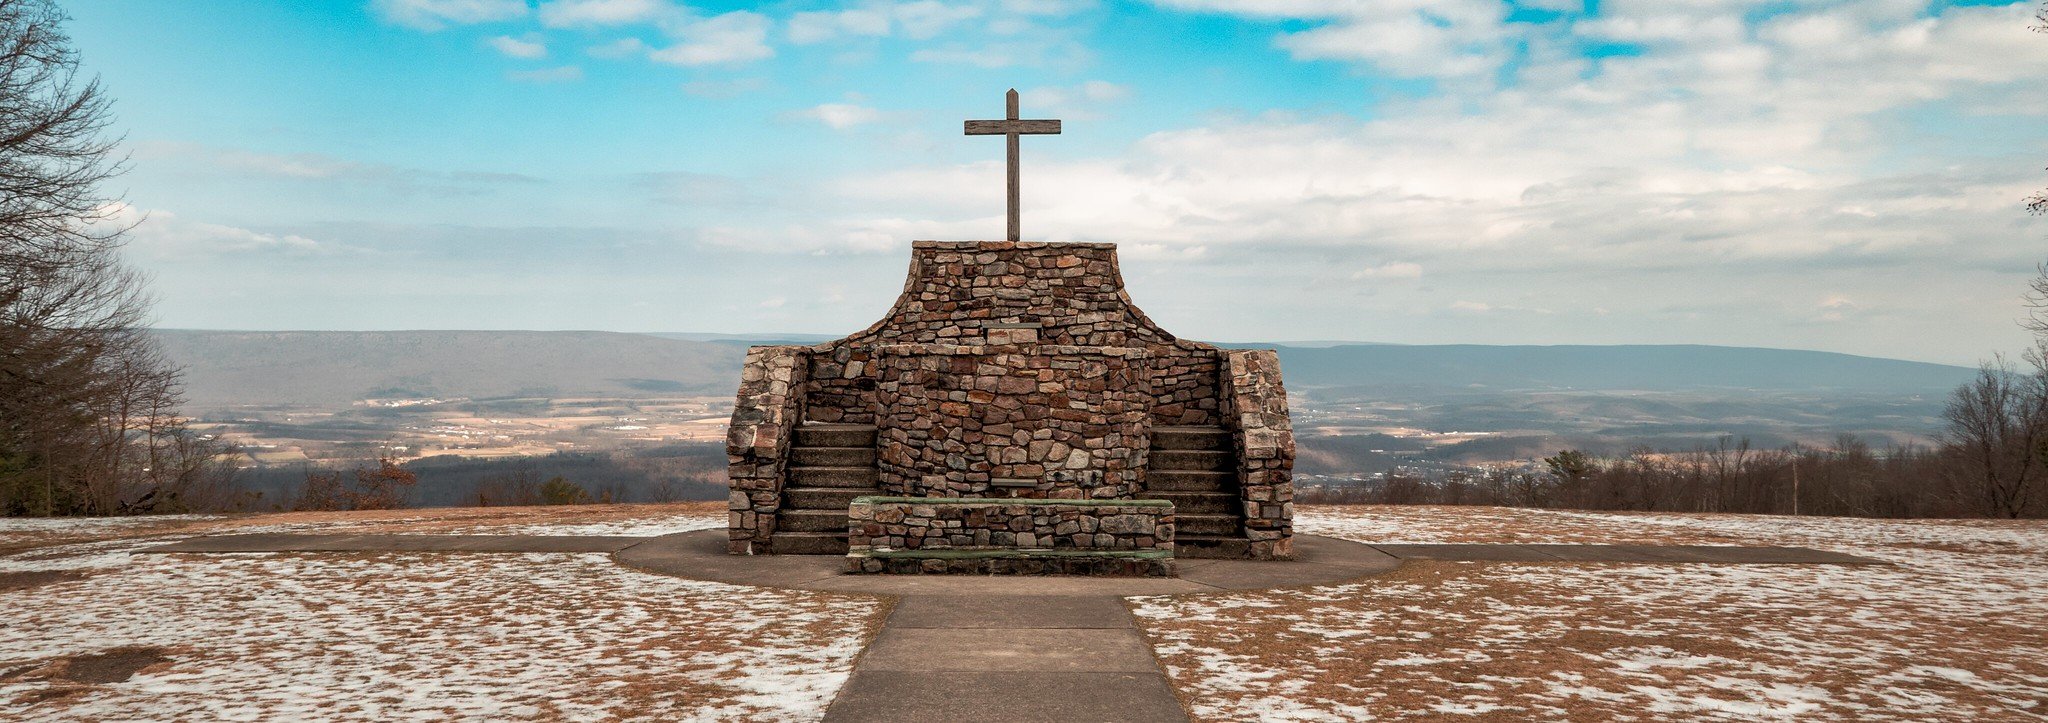  Mt Pigsah Altar. high atop Snyder County, PA.  Built in 1979. 